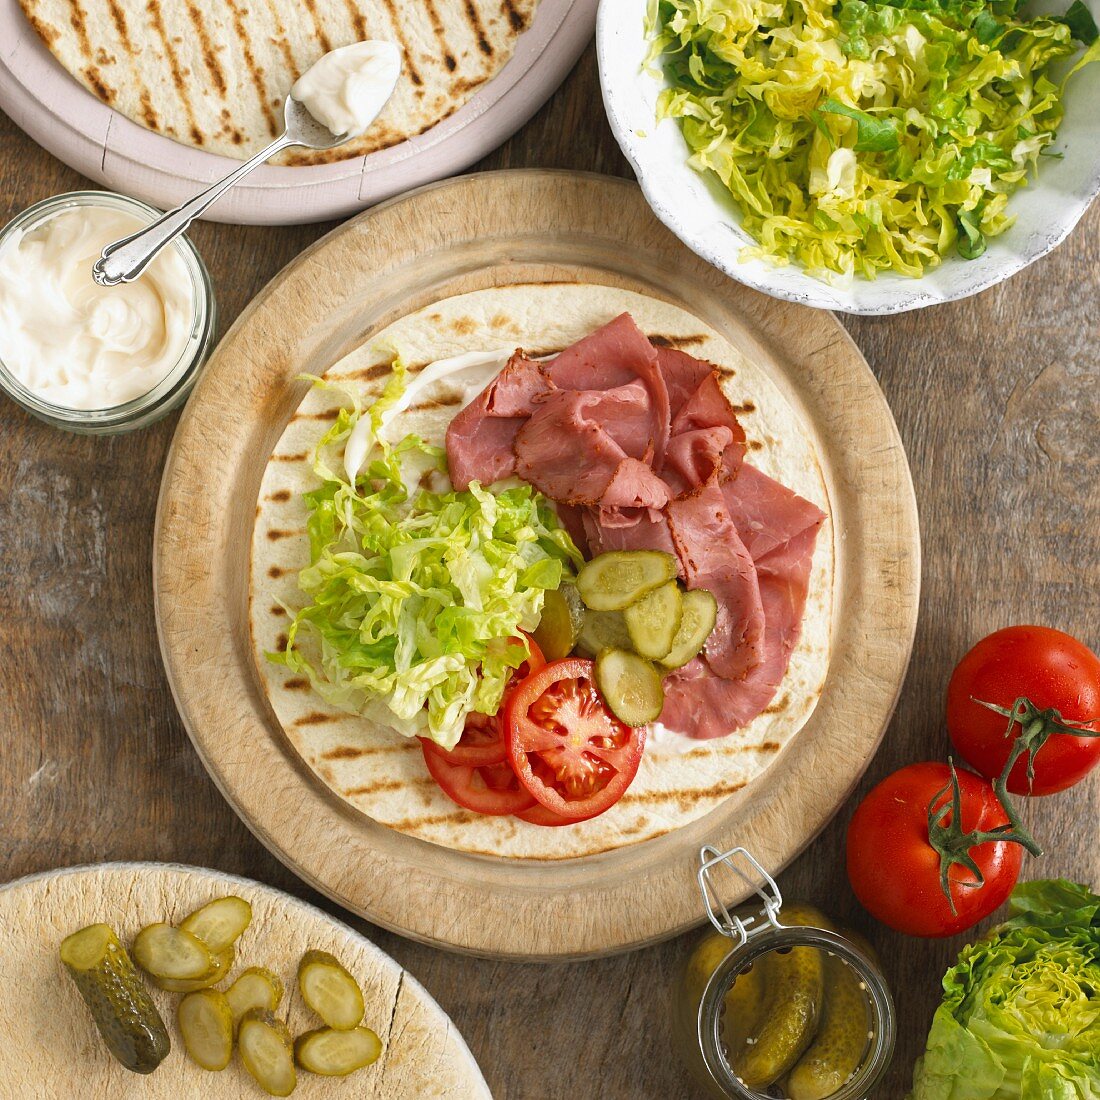 A wrap with pastrami, salad, pickled gherkins, mayonnaise and tomatoes